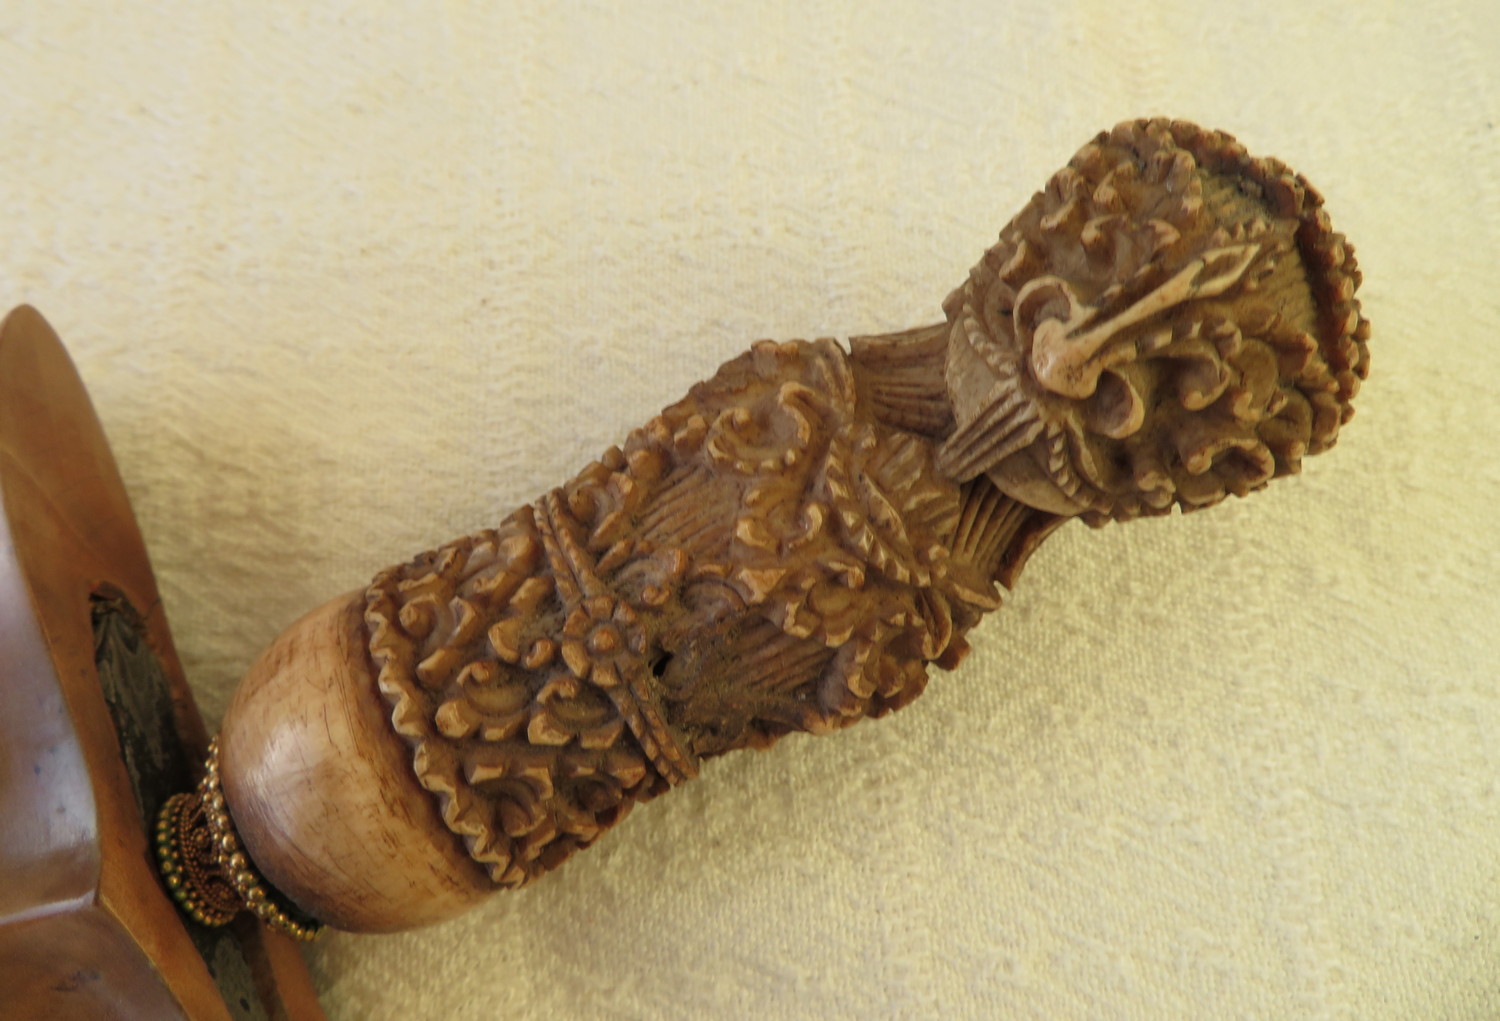 Antique Javanese/Indonesian 19th C Kris with Bone/Ivory?Handle, Gold Metal Ferrule, Brass Scabbard. - Image 2 of 10